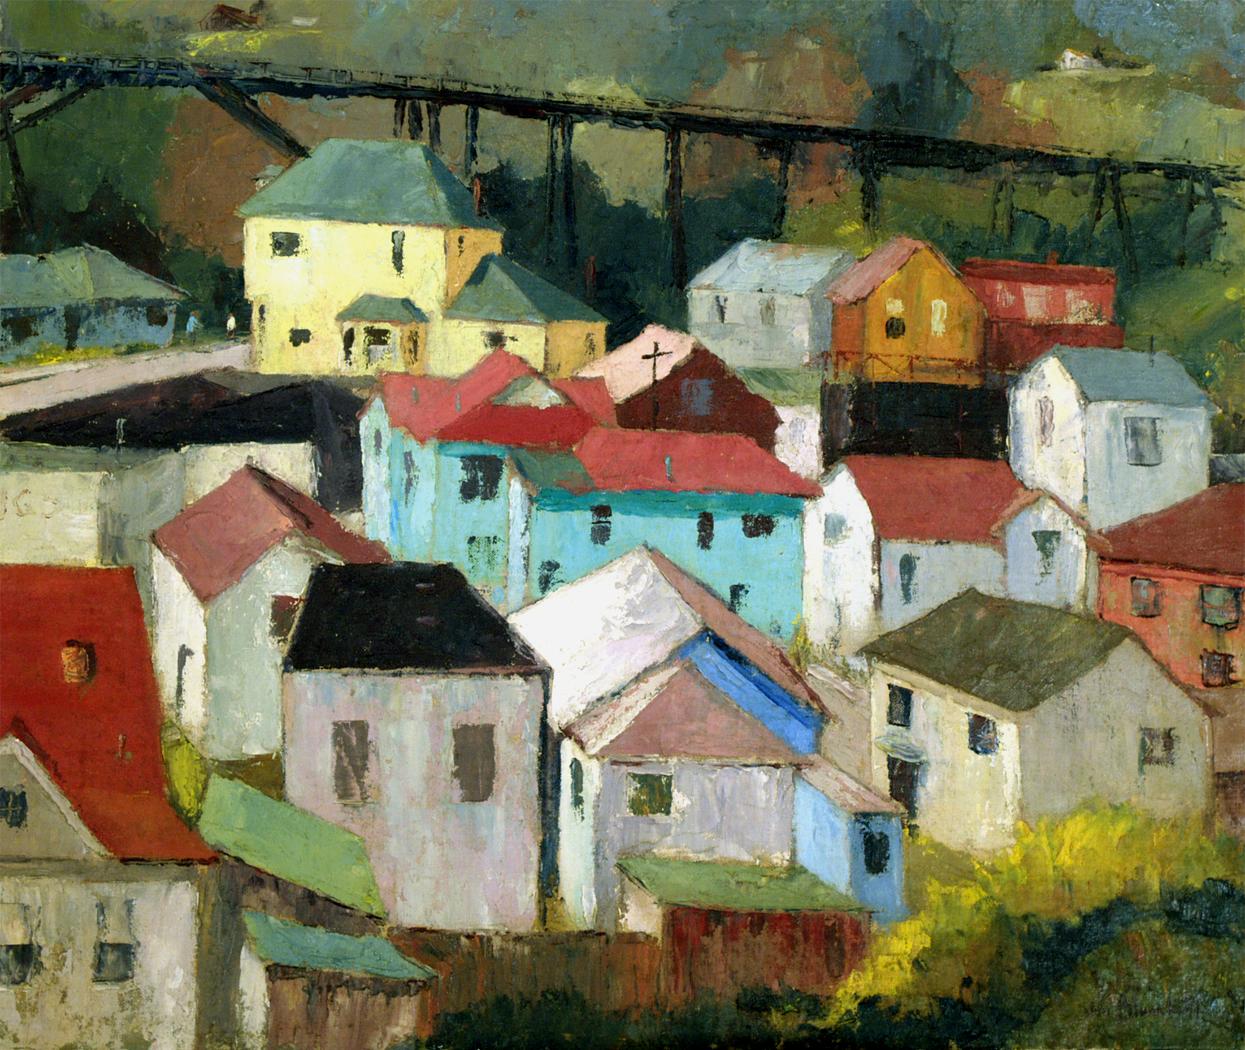 Capitola Roofs (California) - Painting by Jon Blanchette